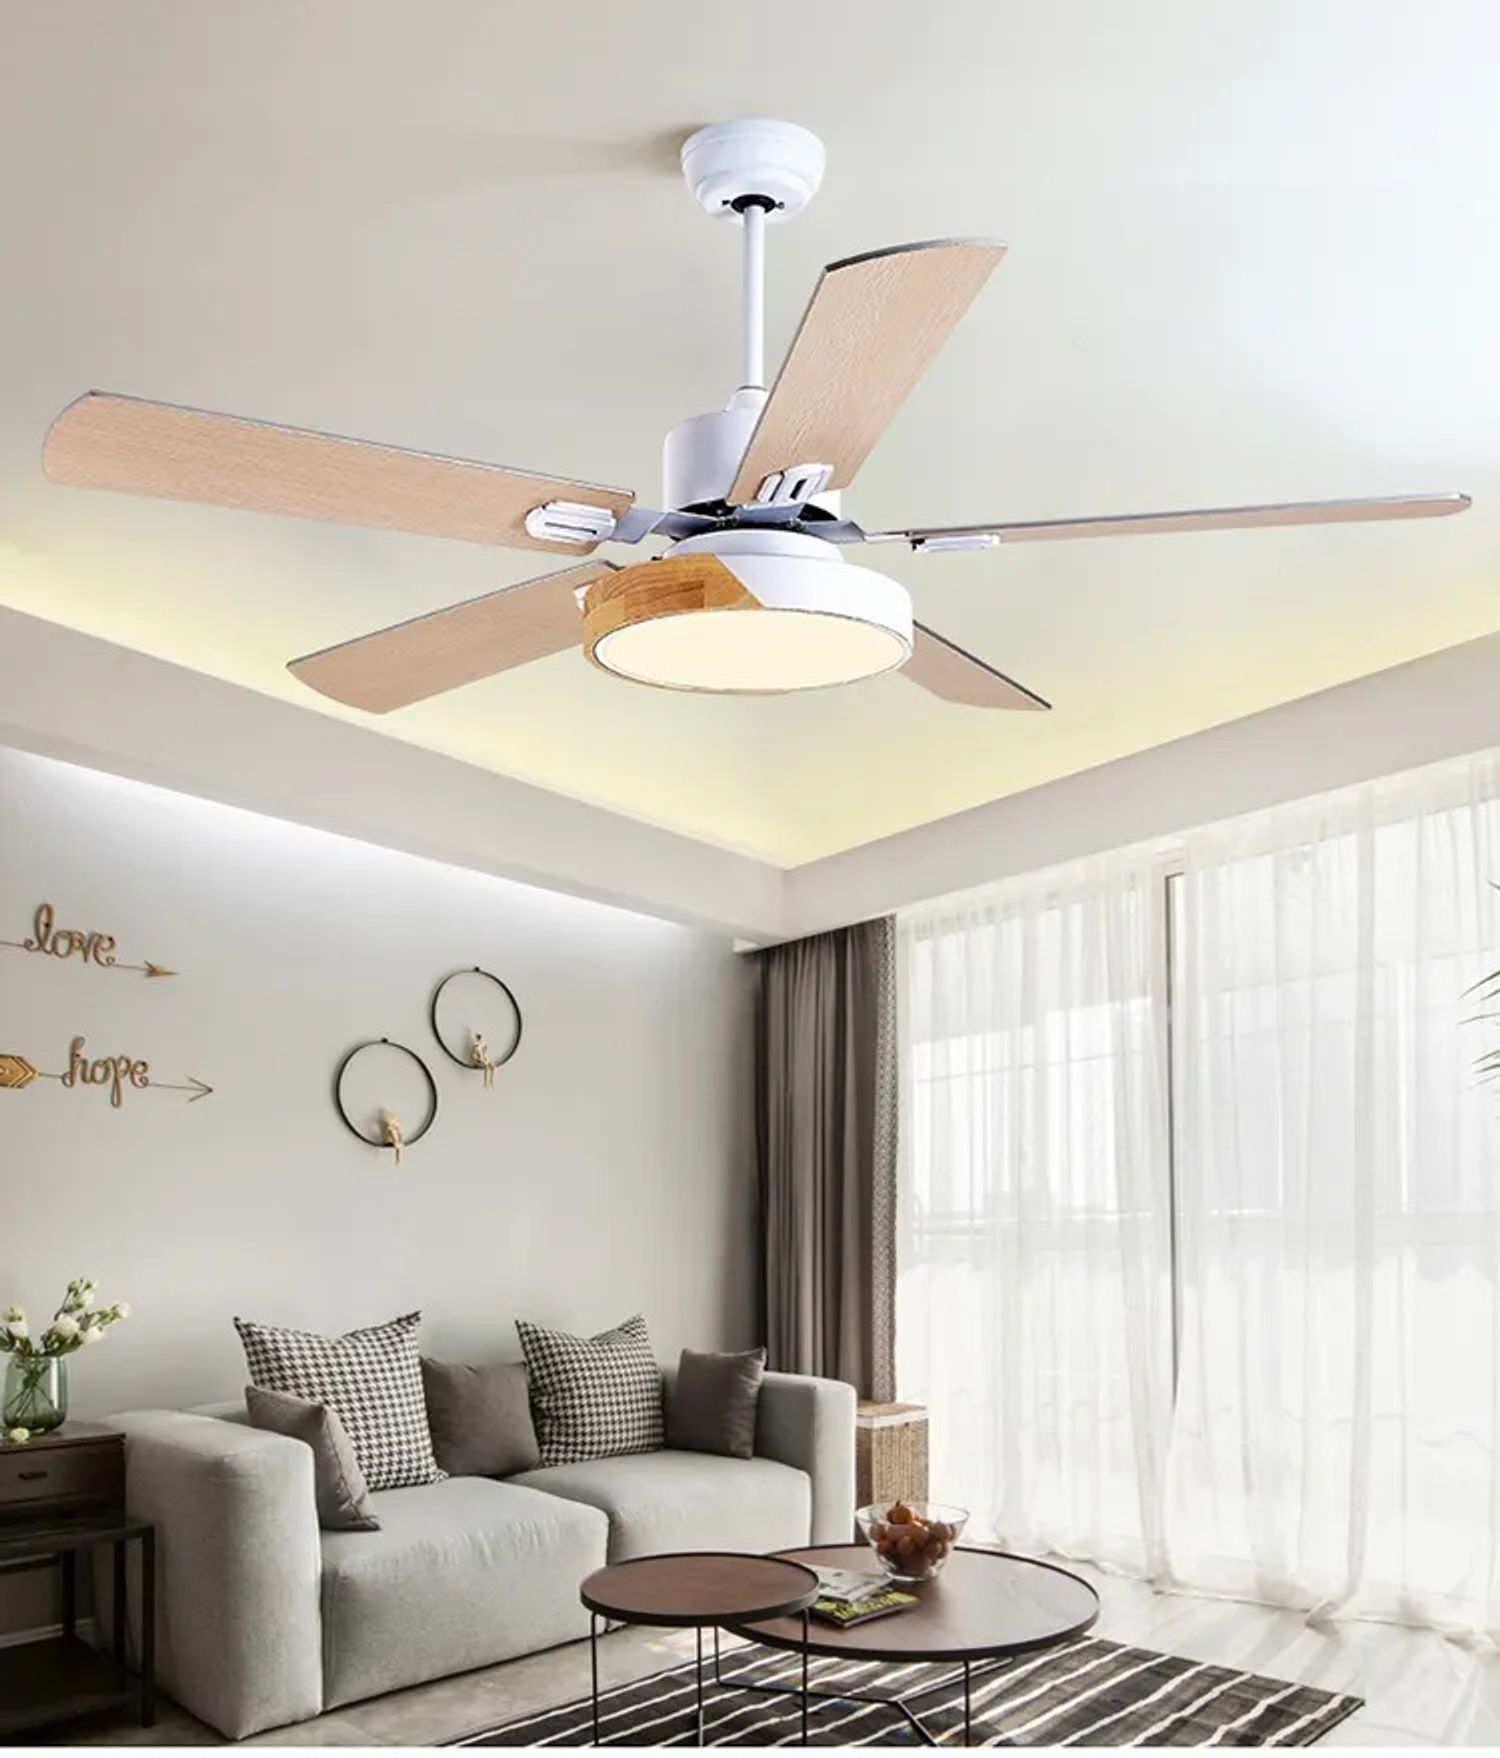 KBS White Downrod silent ceiling fan with light